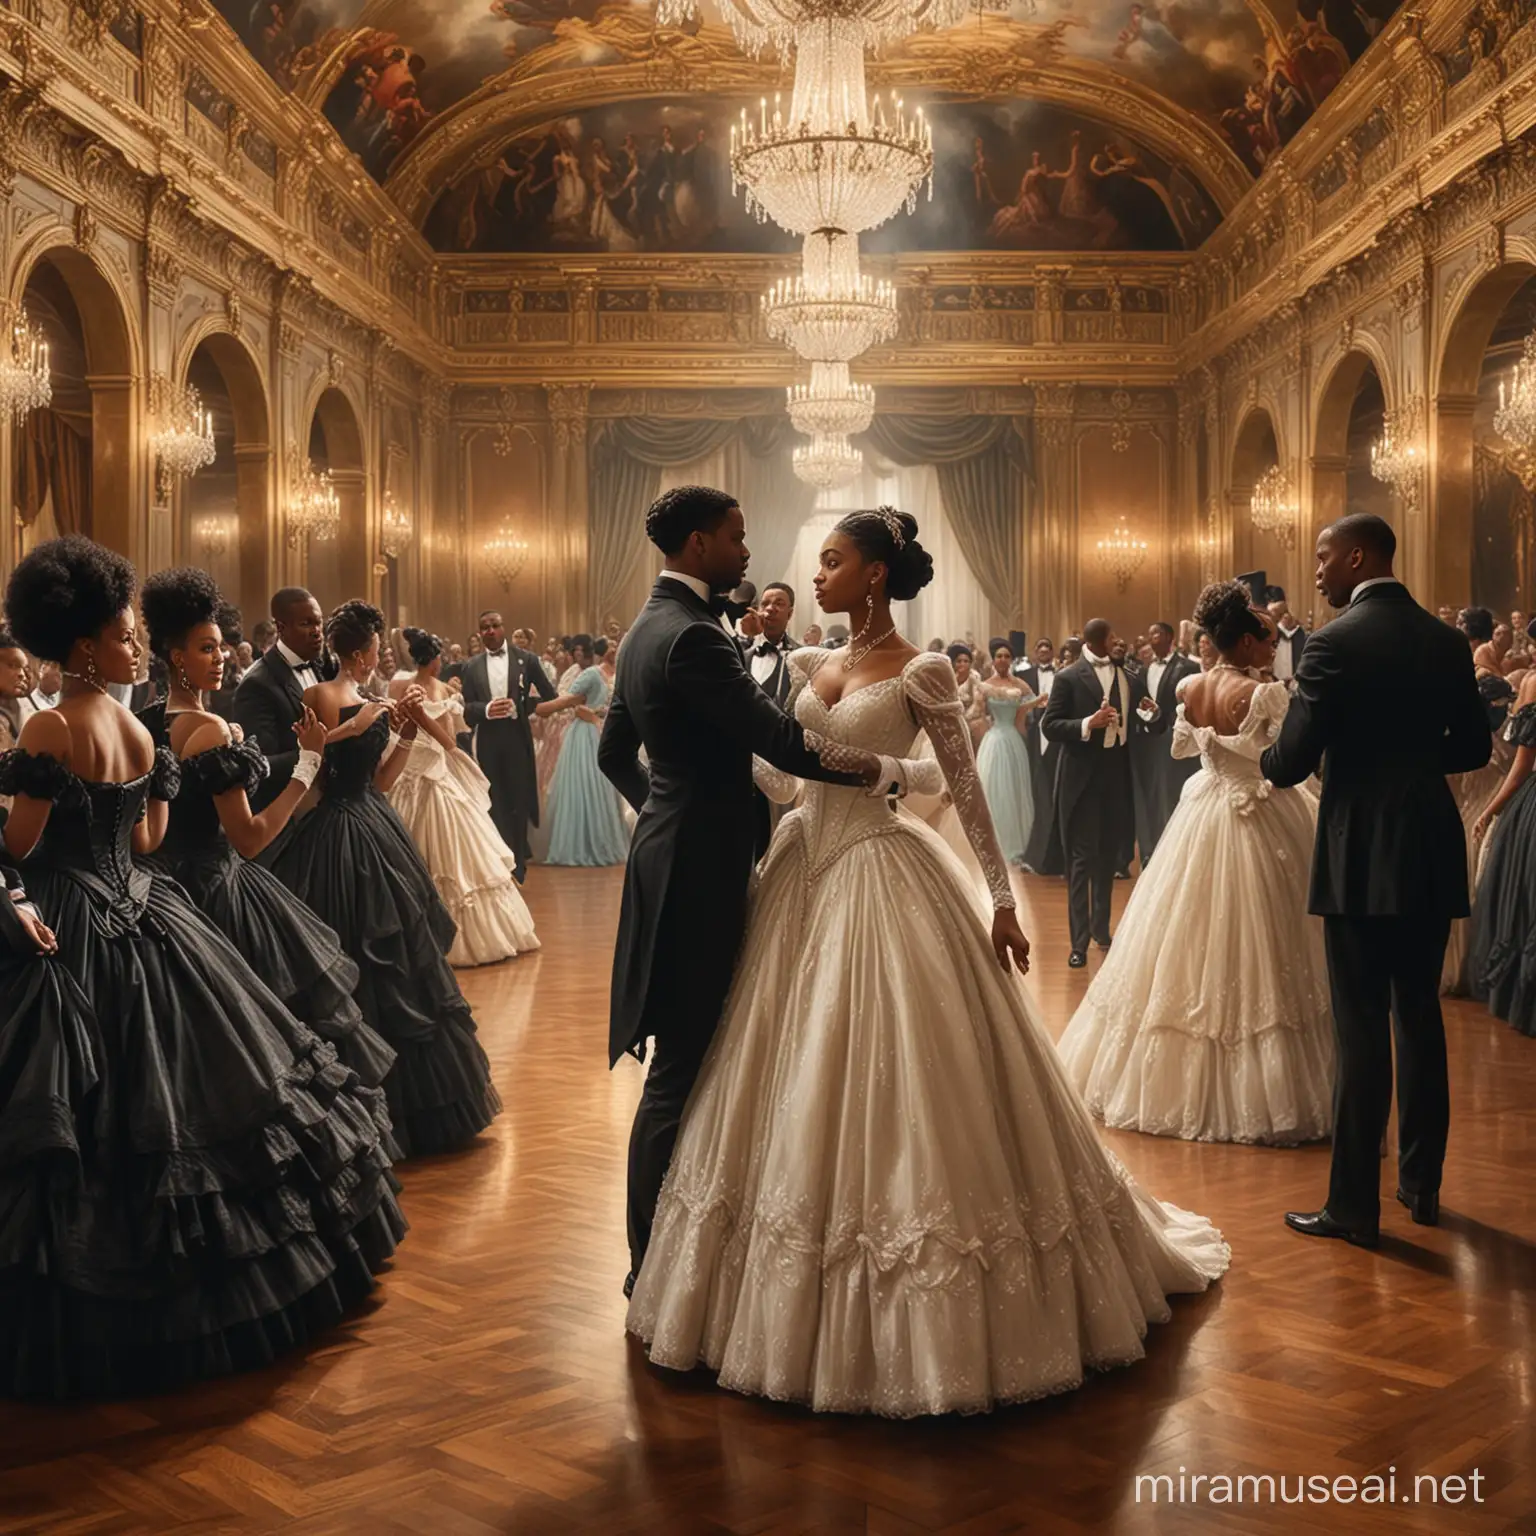 Elegant Black Victorian Ball Glamorous Gowns and Black Tie